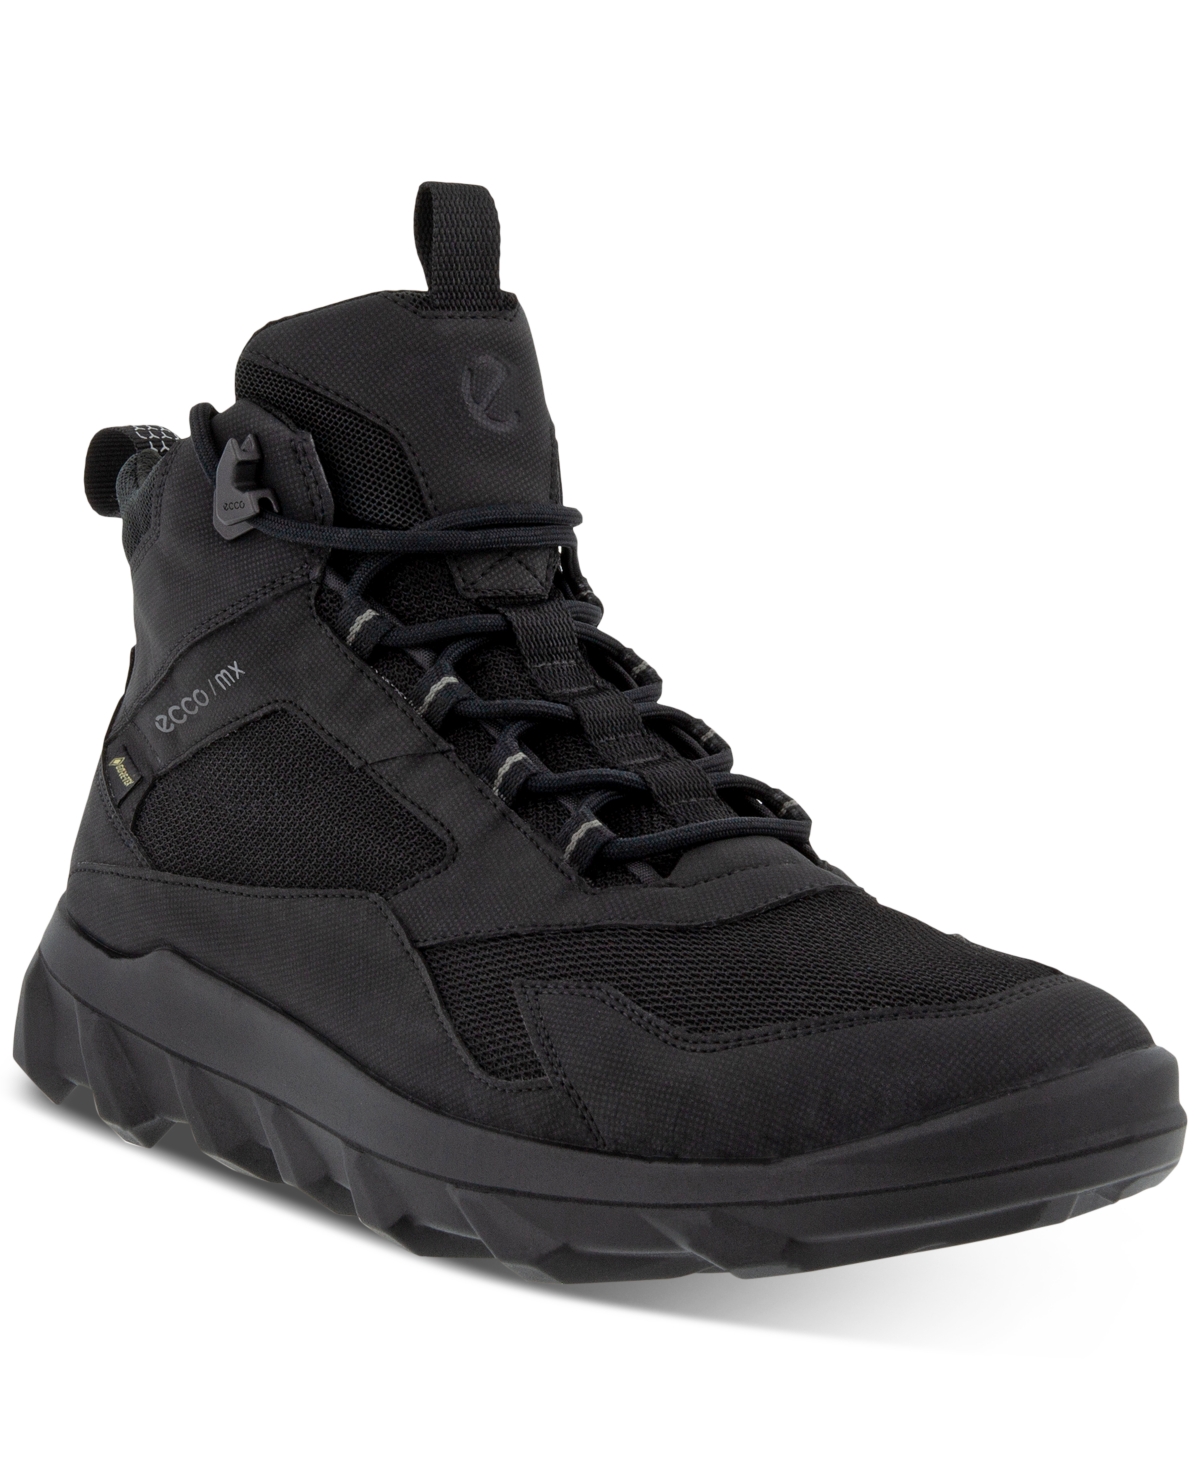 UPC 194890197510 product image for Ecco Men's Mx Mid Waterproof Lace-Up Hiking Boots Men's Shoes | upcitemdb.com